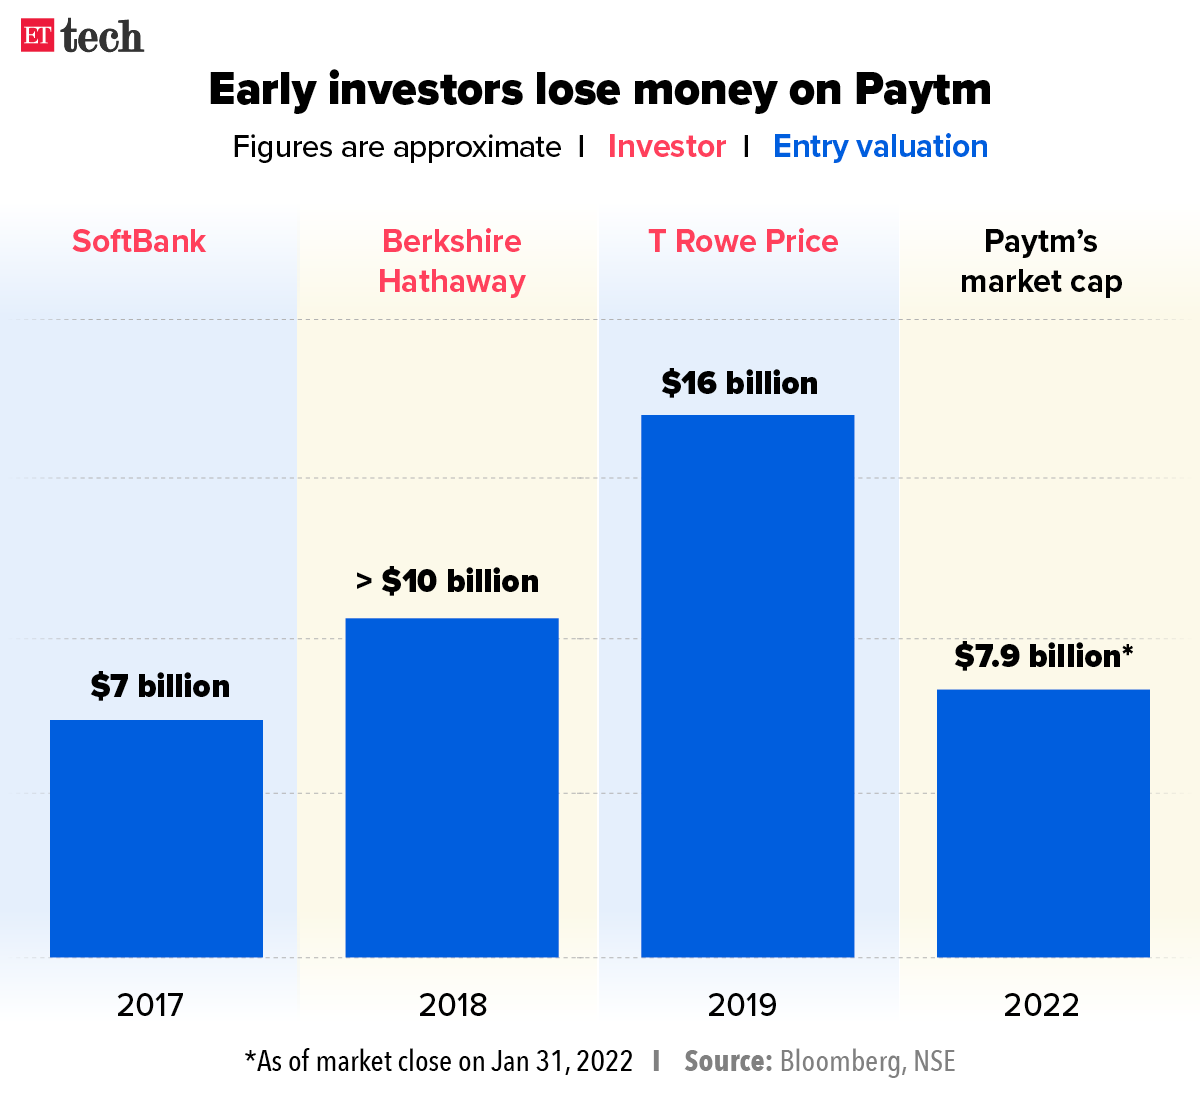 Early investors lose money on Paytm